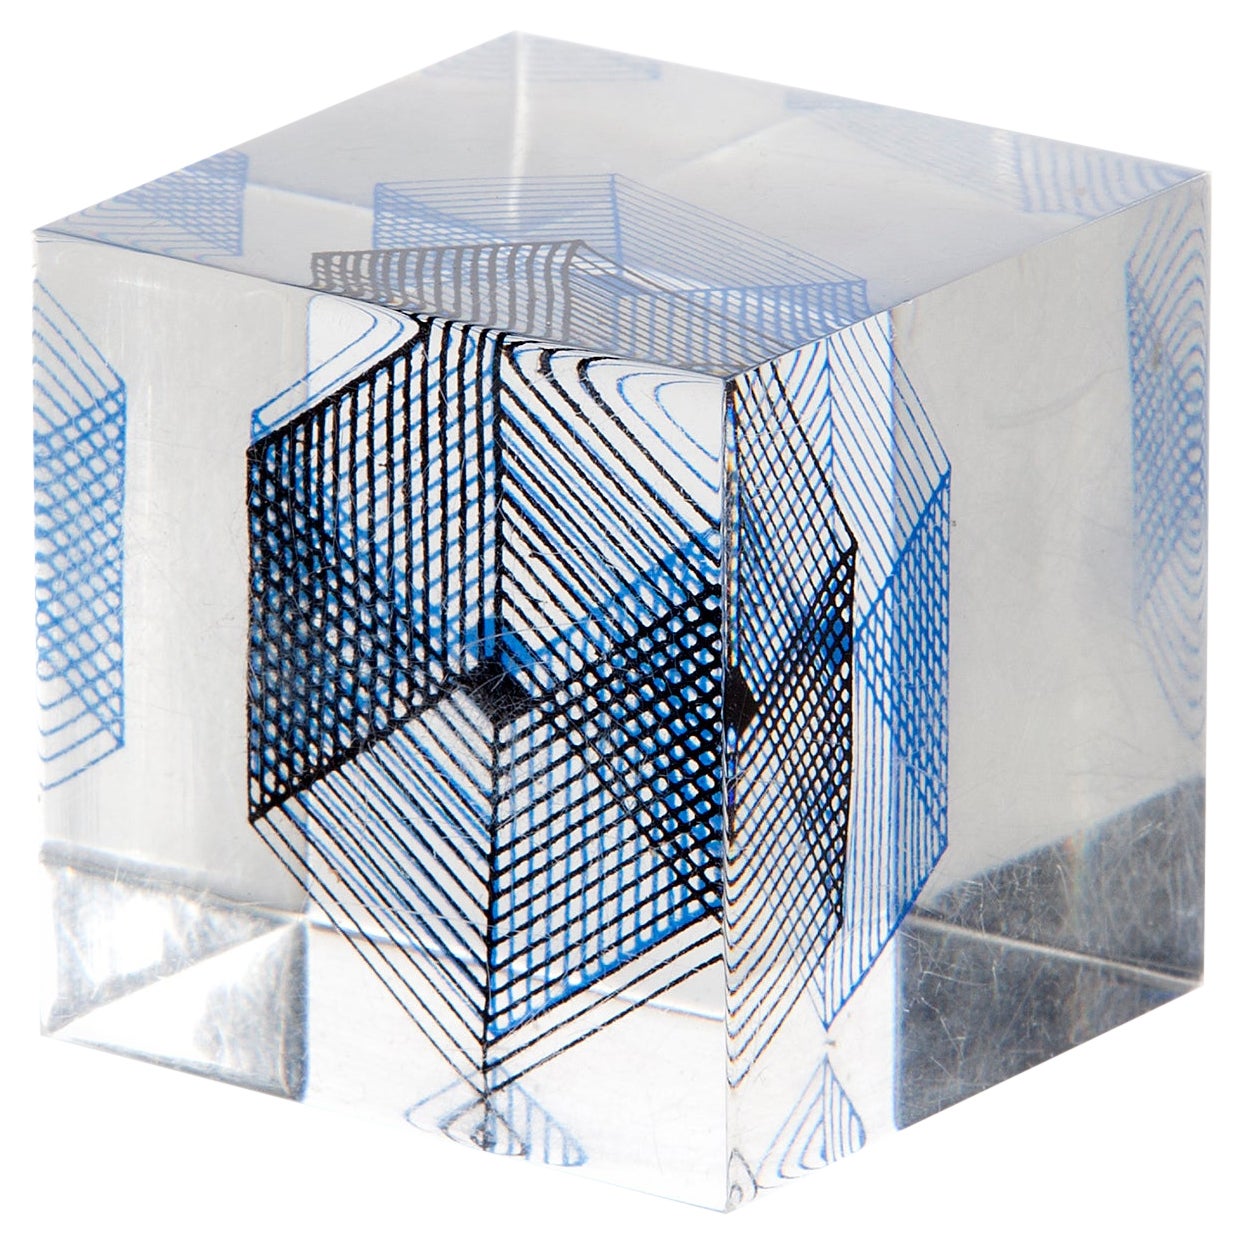 Small Sculpture in Plexiglass with Embedded Abstract Image